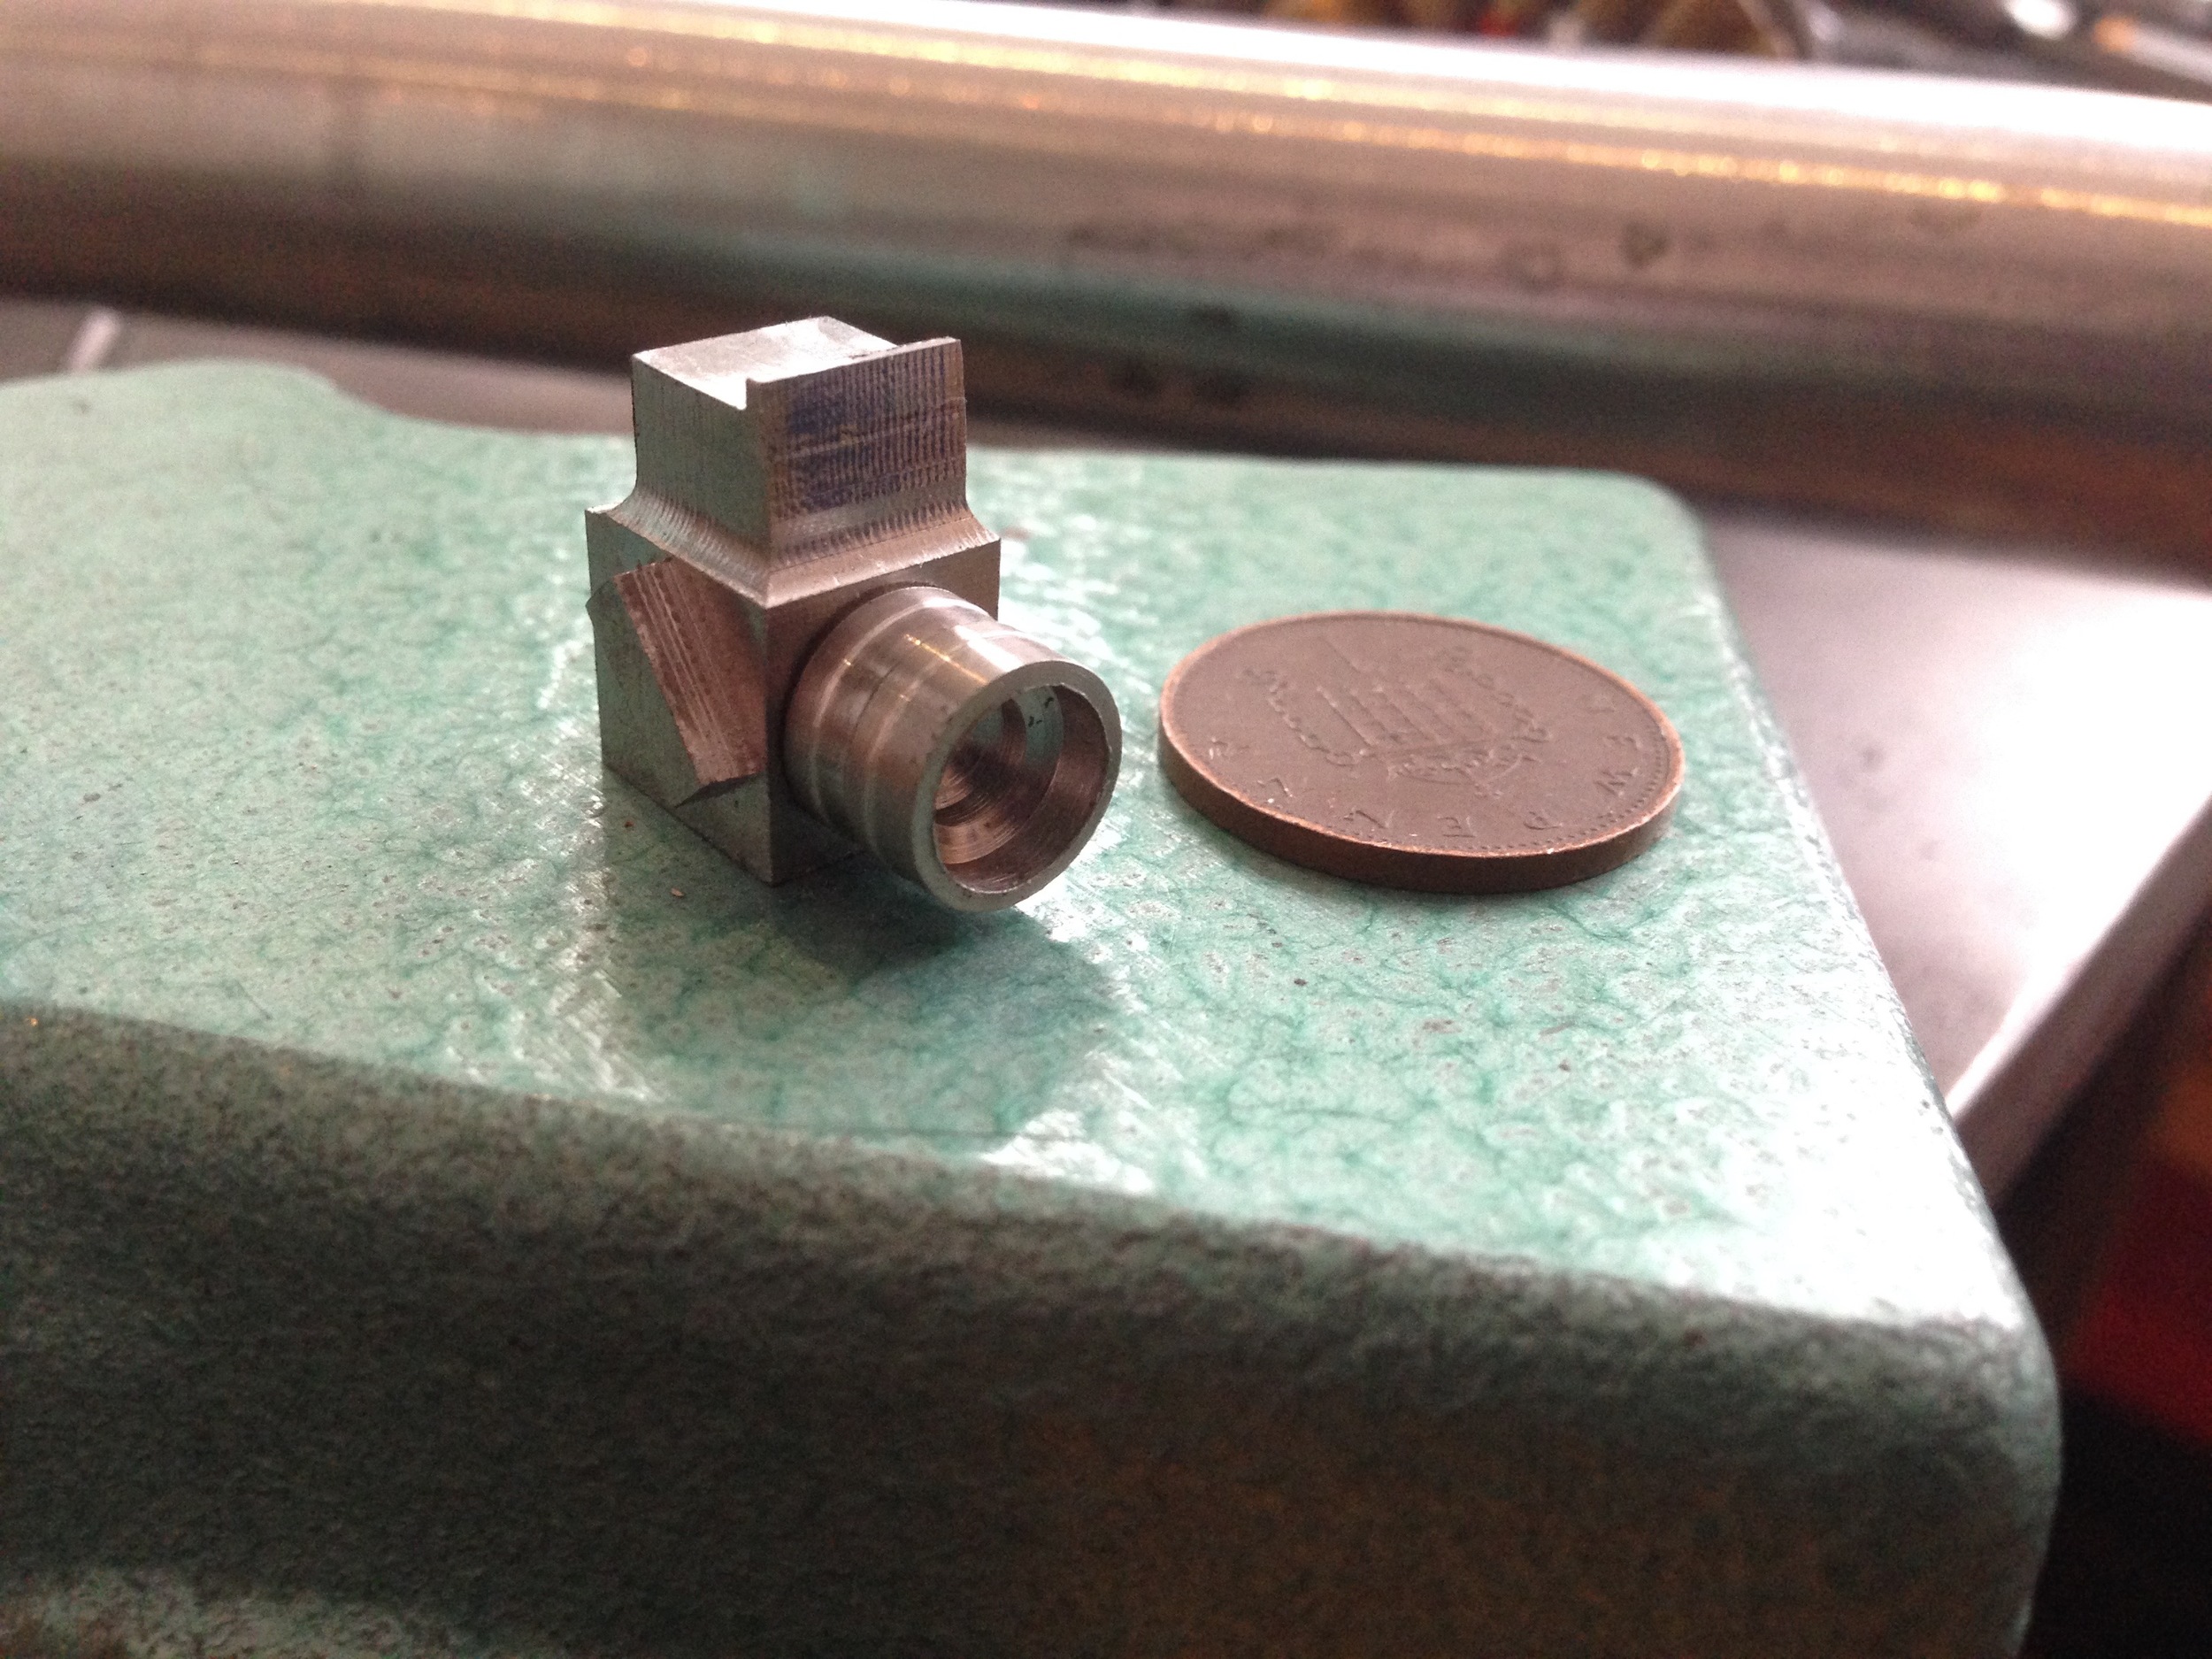  Miniature camera and lens completed, all hand machined 